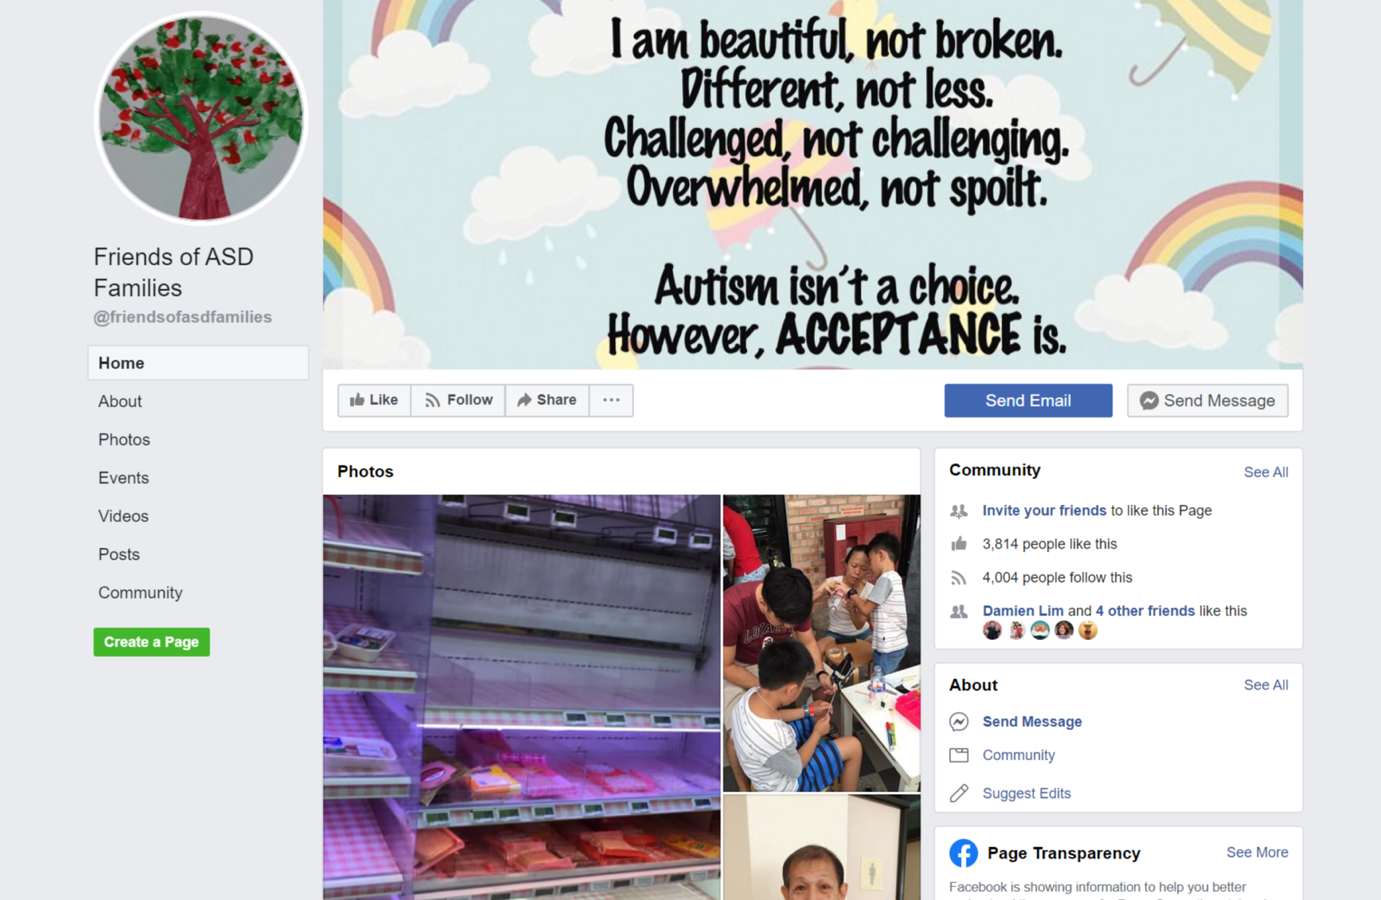 Screenshot of the Facebook group for Friends of ASD Families.